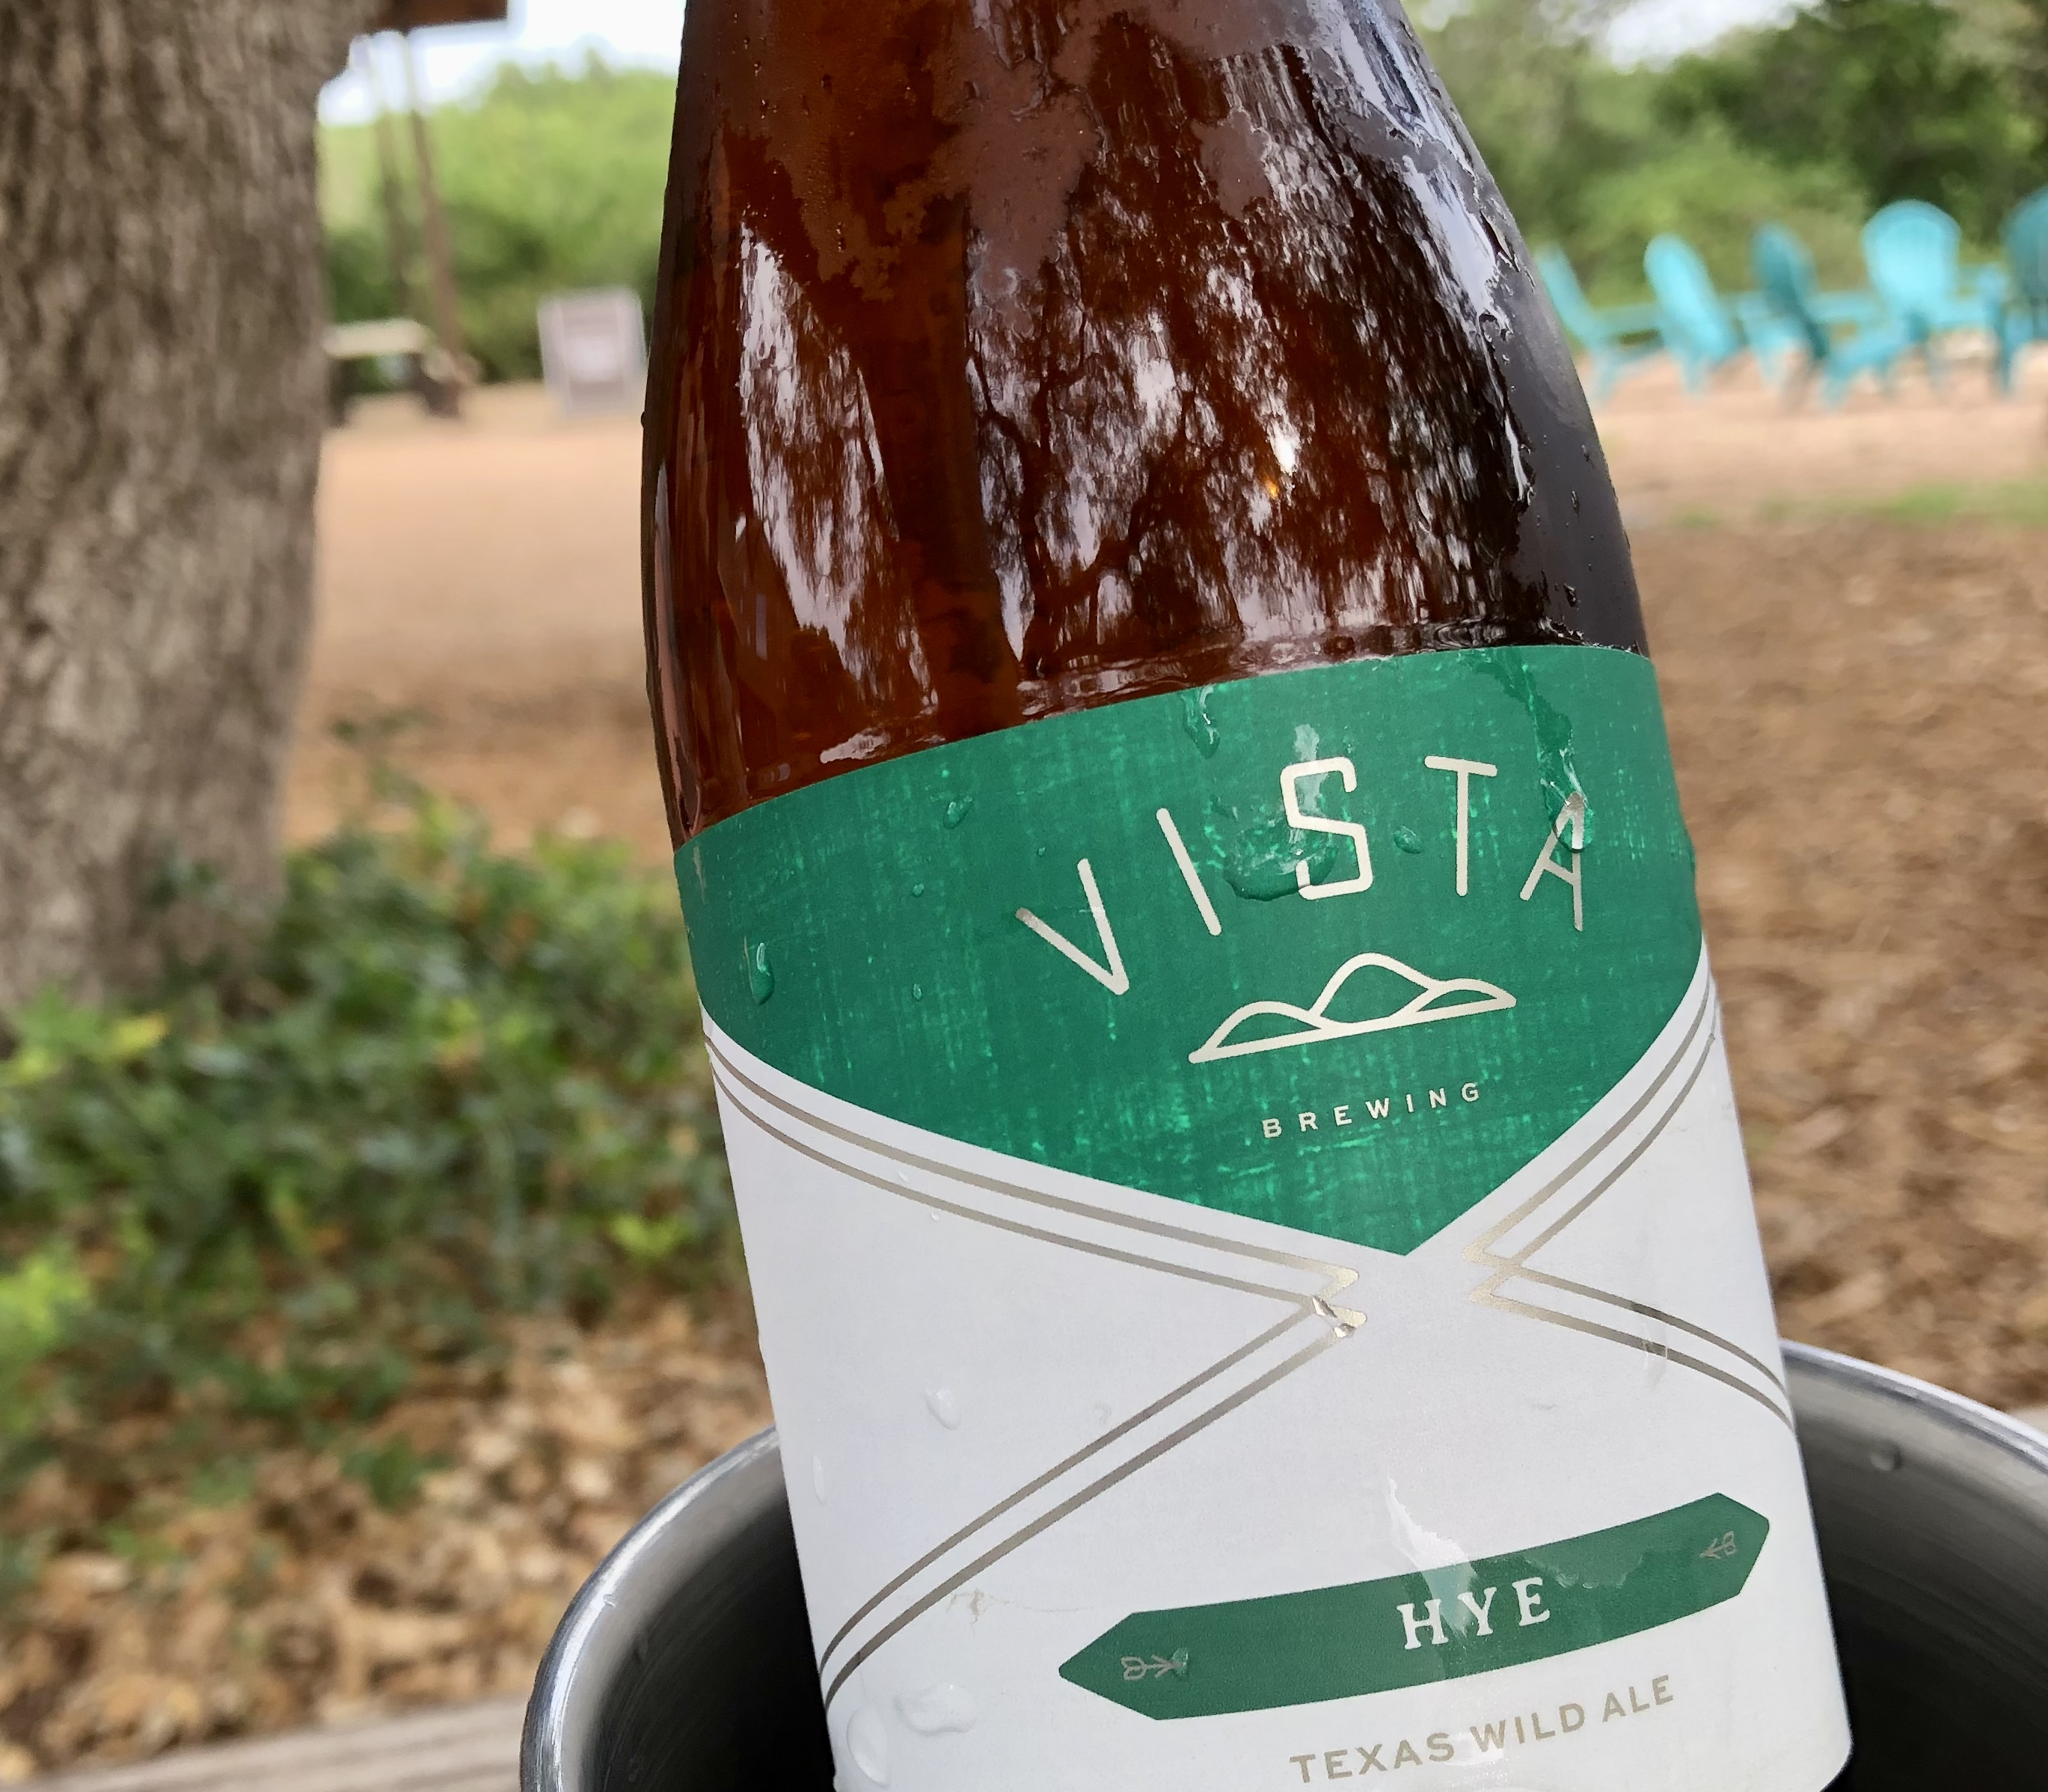 A bottle of beer at Vista Brewing in Driftwood. Photo: John Frank/Axios